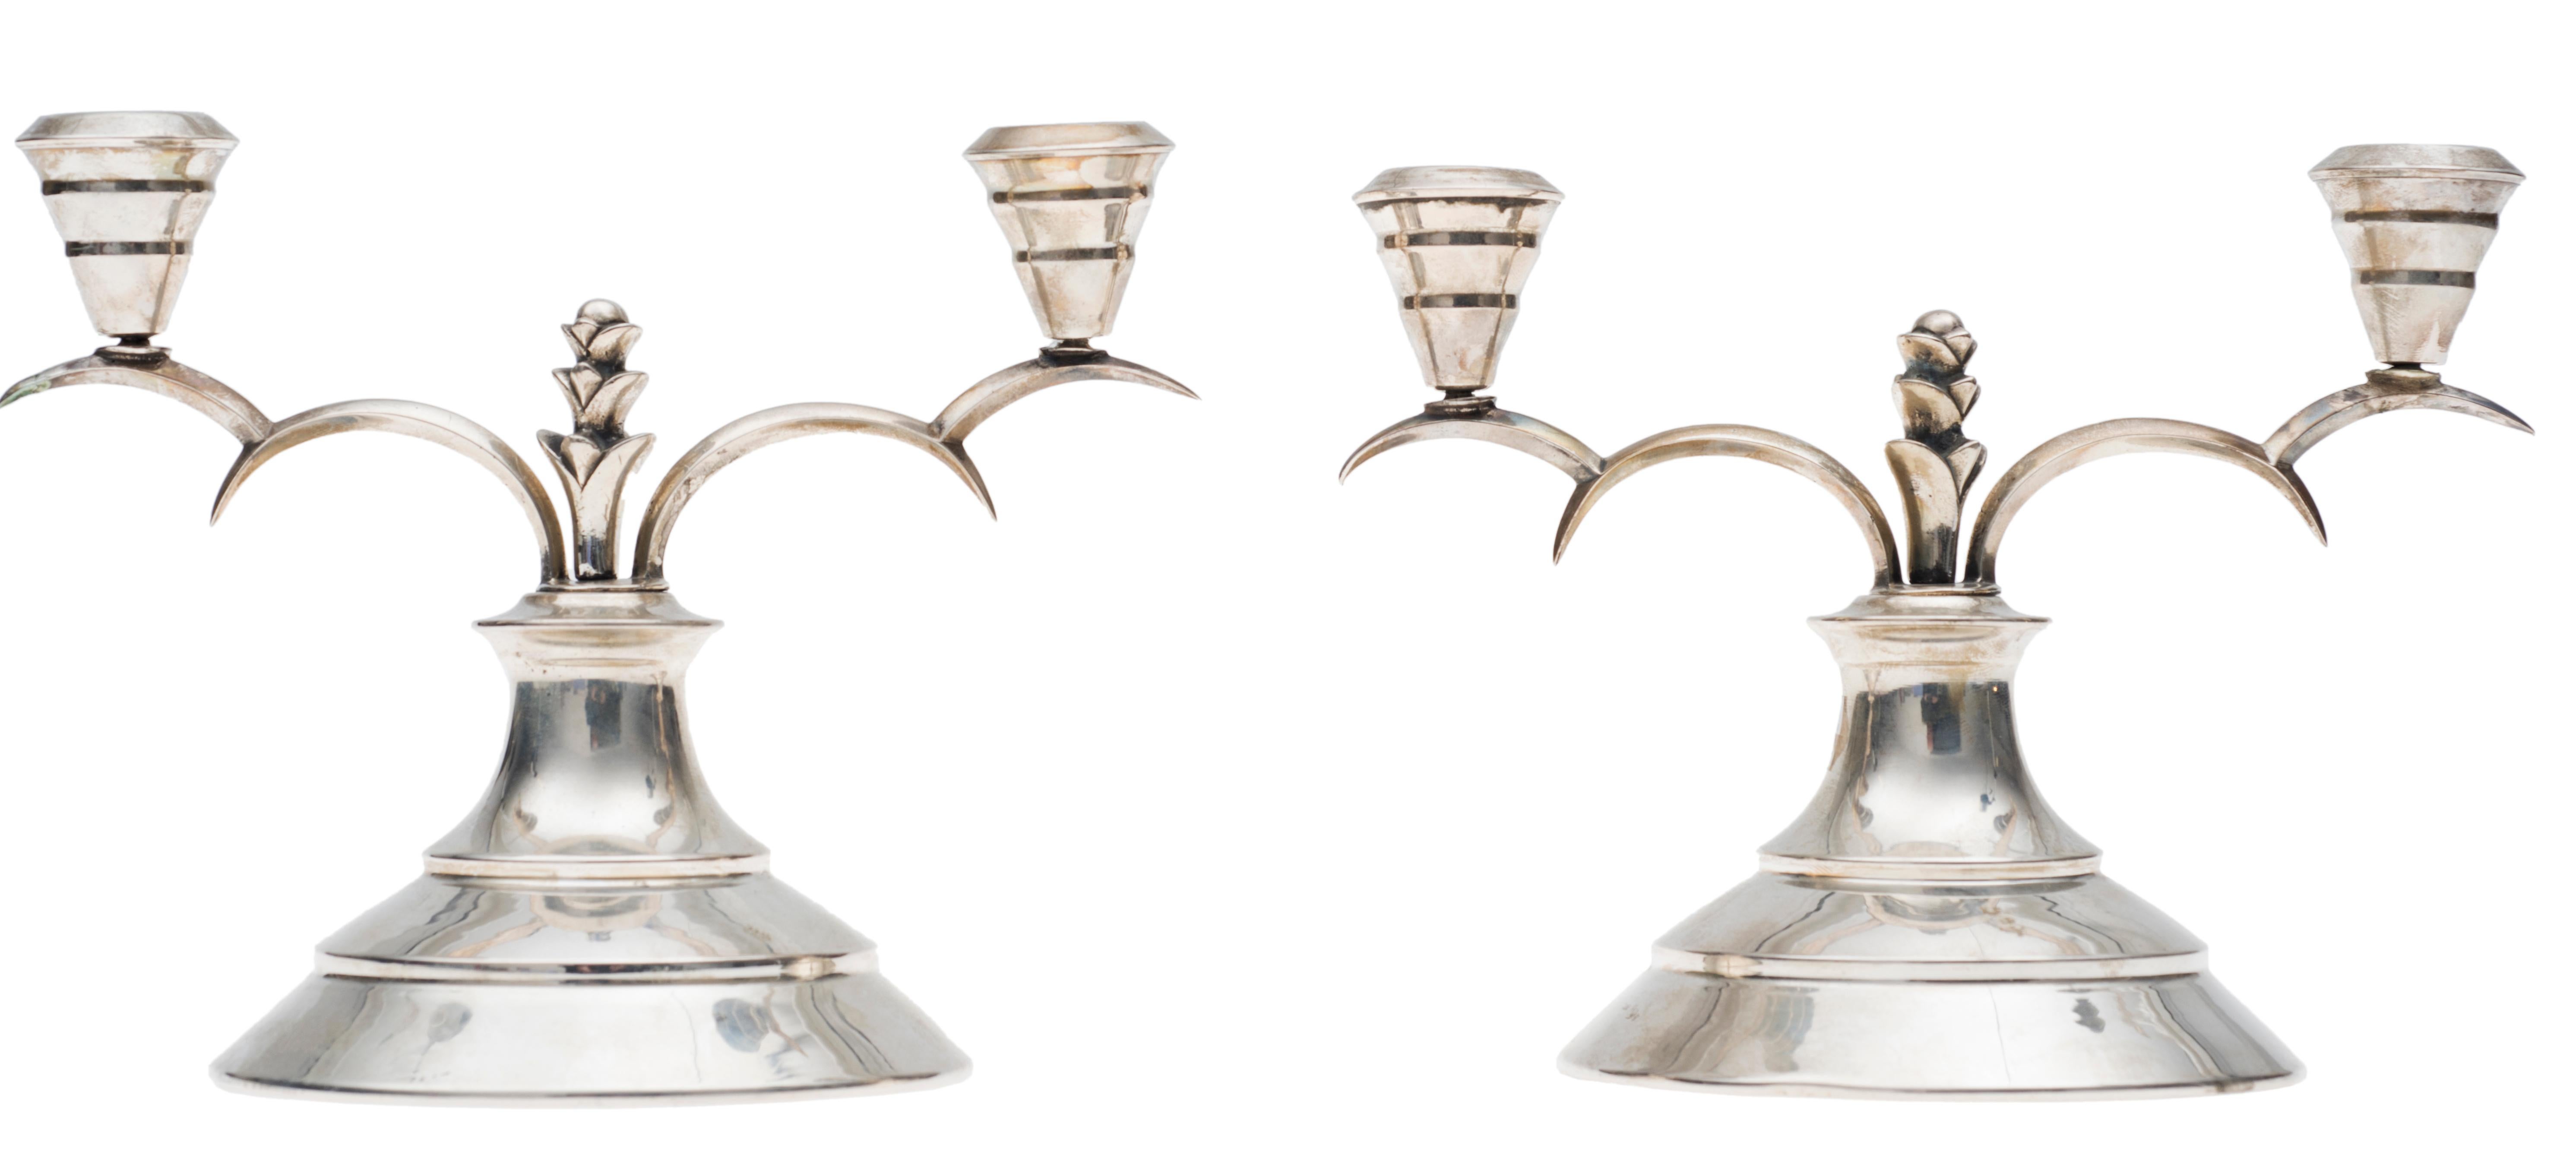 Sterling Silver Vintage Pair of Decorative Candleholders, Italian Manufacture, Early 1900 For Sale